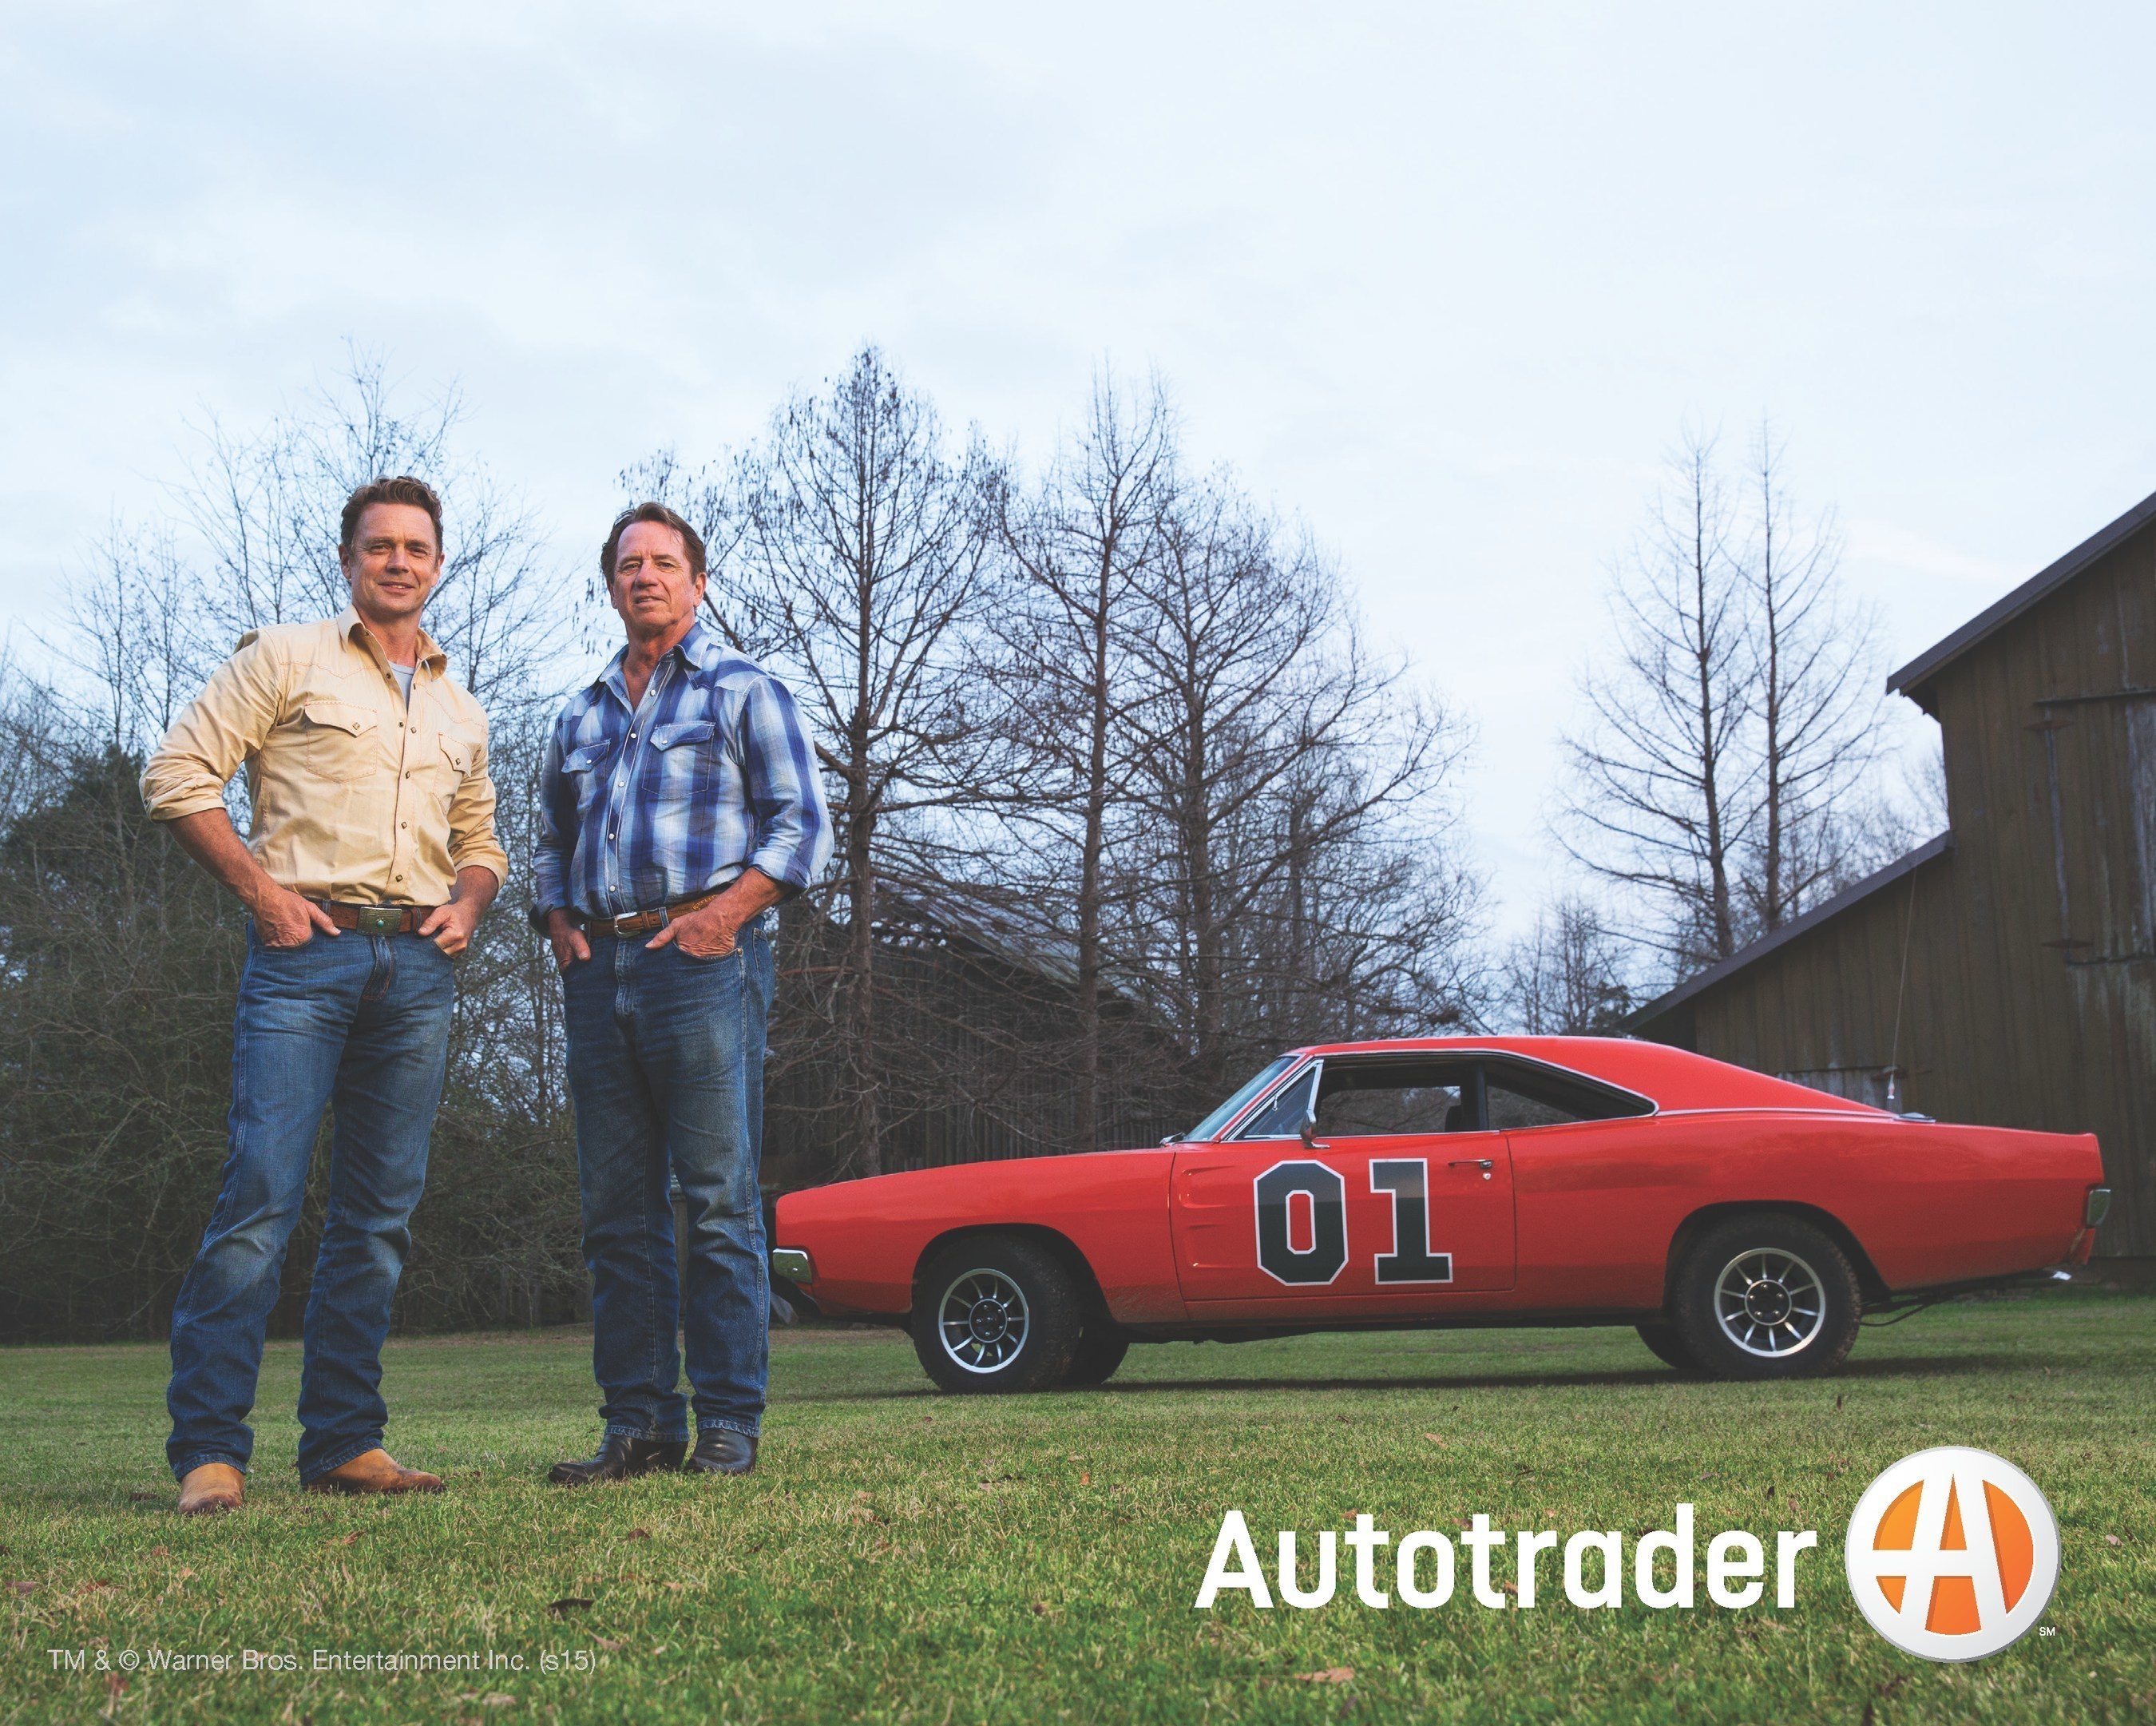 Autotrader Enlists Stars of "The Dukes of Hazzard" to Celebrate the Company's New Logo at Bristol Motor Speedway